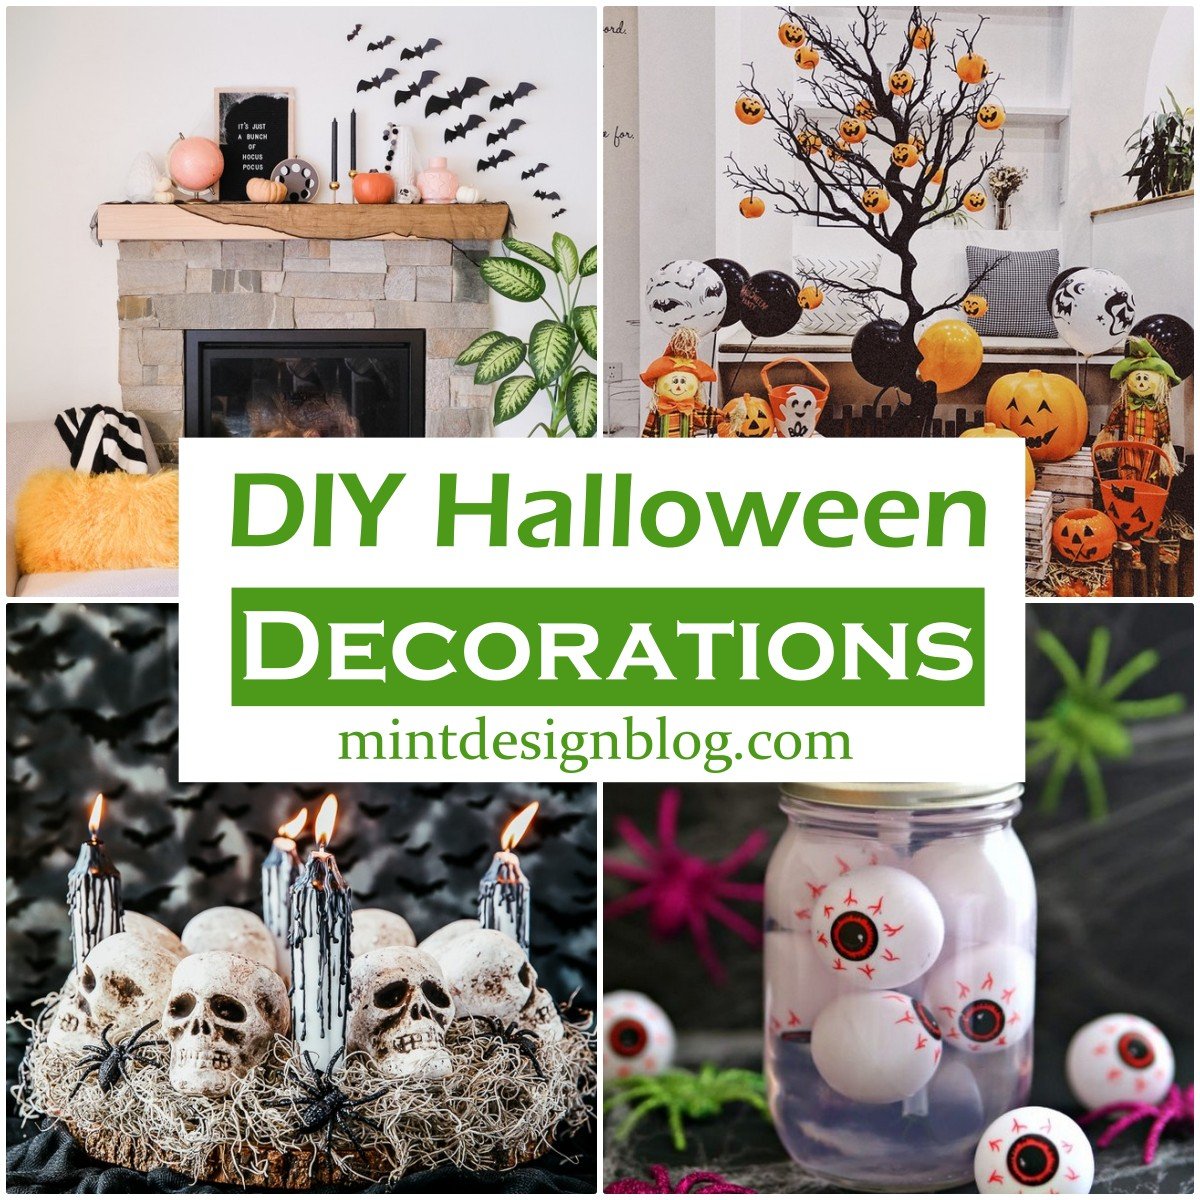 14 Easy DIY Halloween Decorations For Your Home - Mint Design Blog